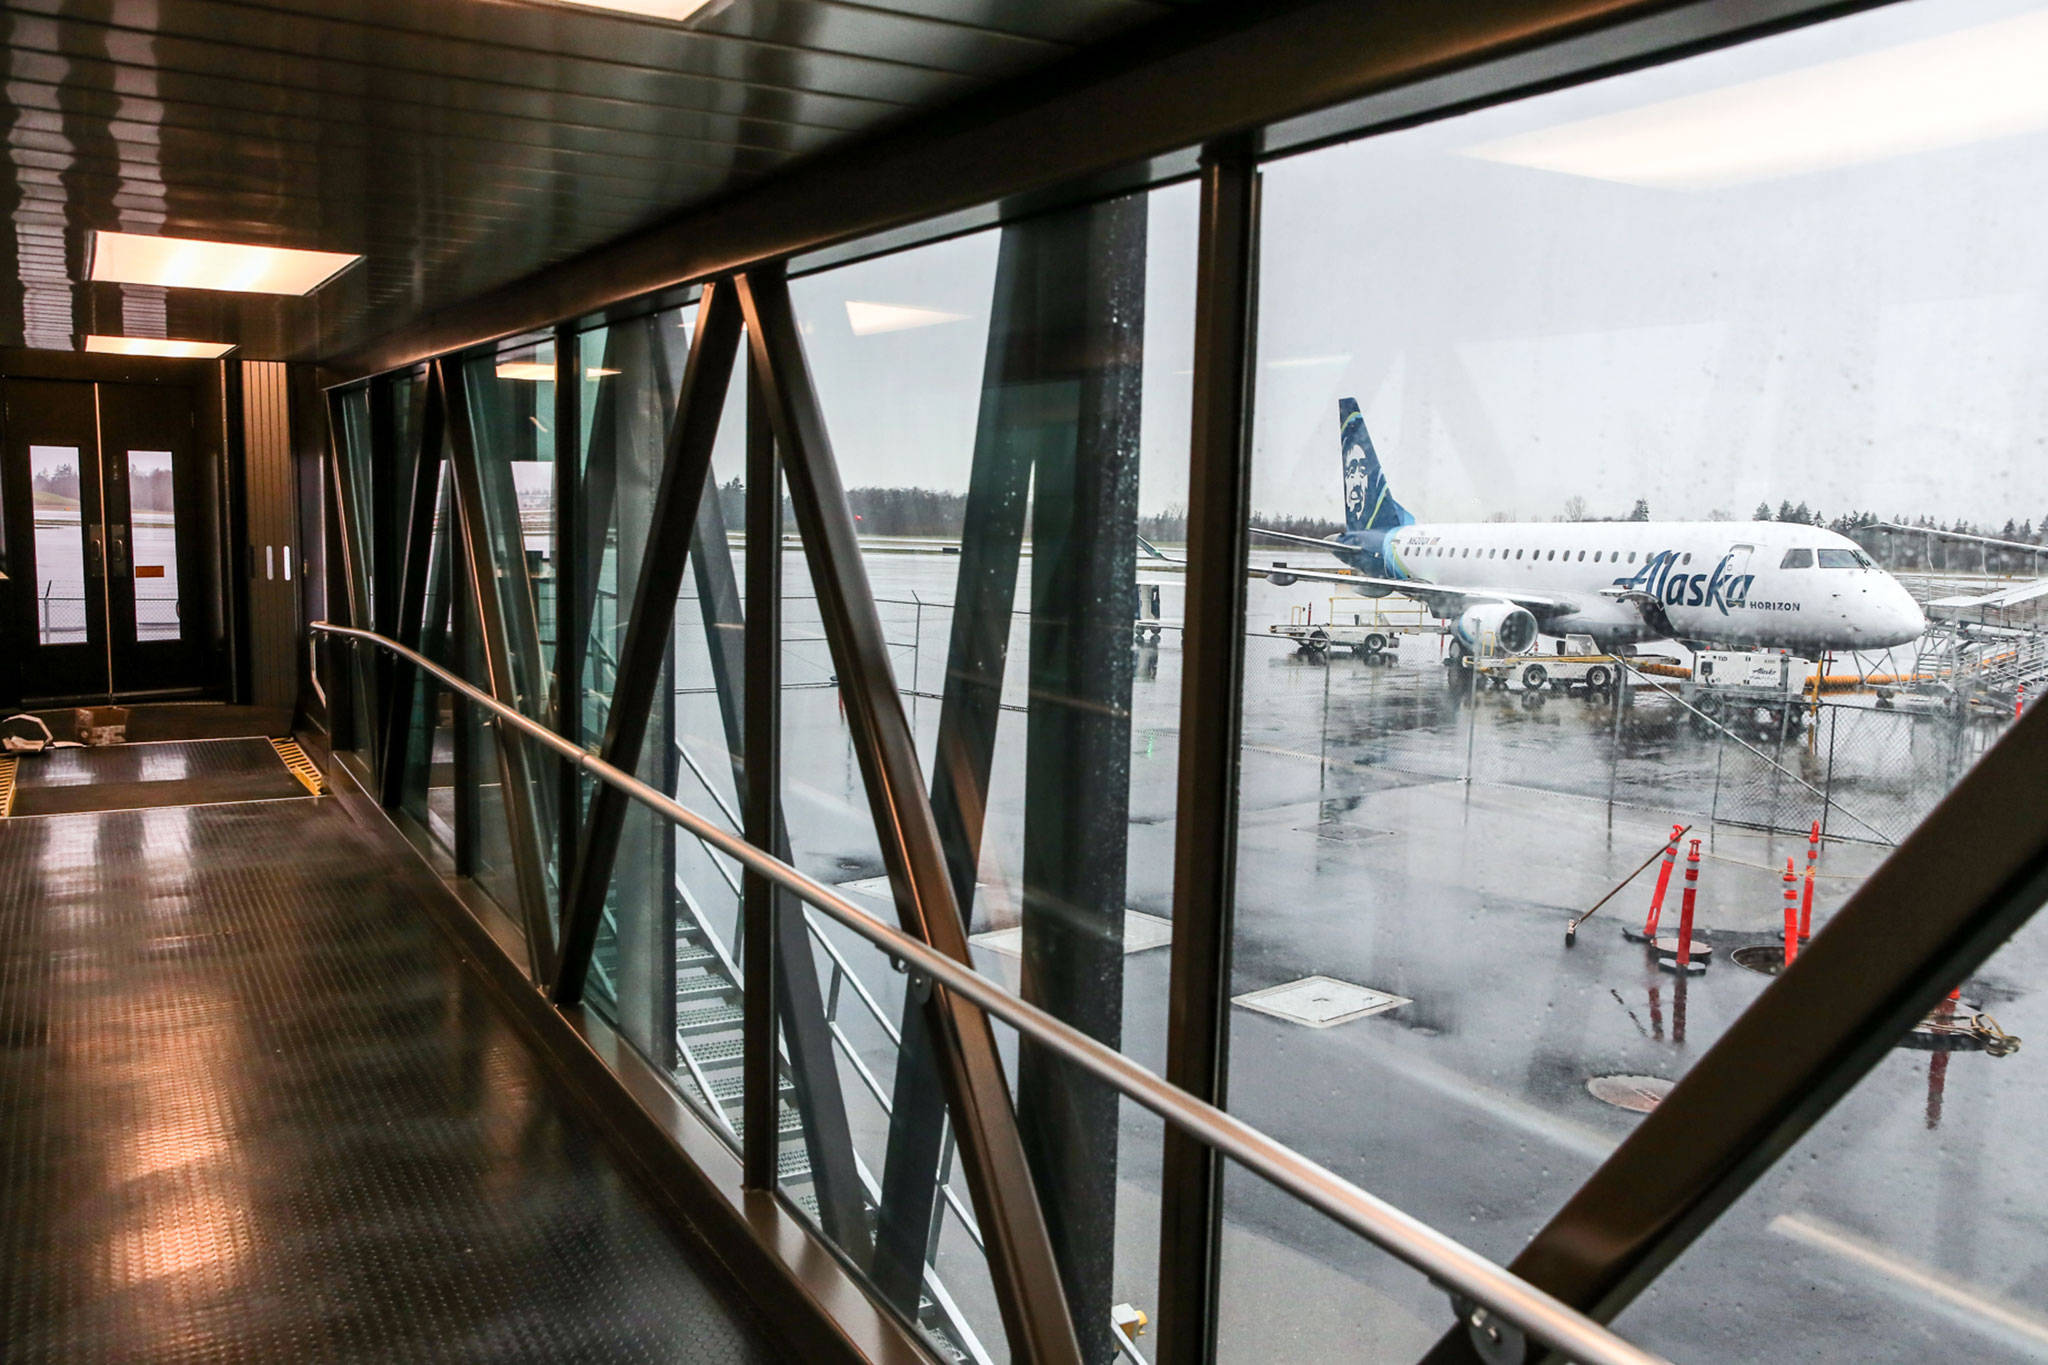 An aircraft seen from the gangway at the new airport at Paine Field in Everett on Jan. 9. (Kevin Clark / Herald file)